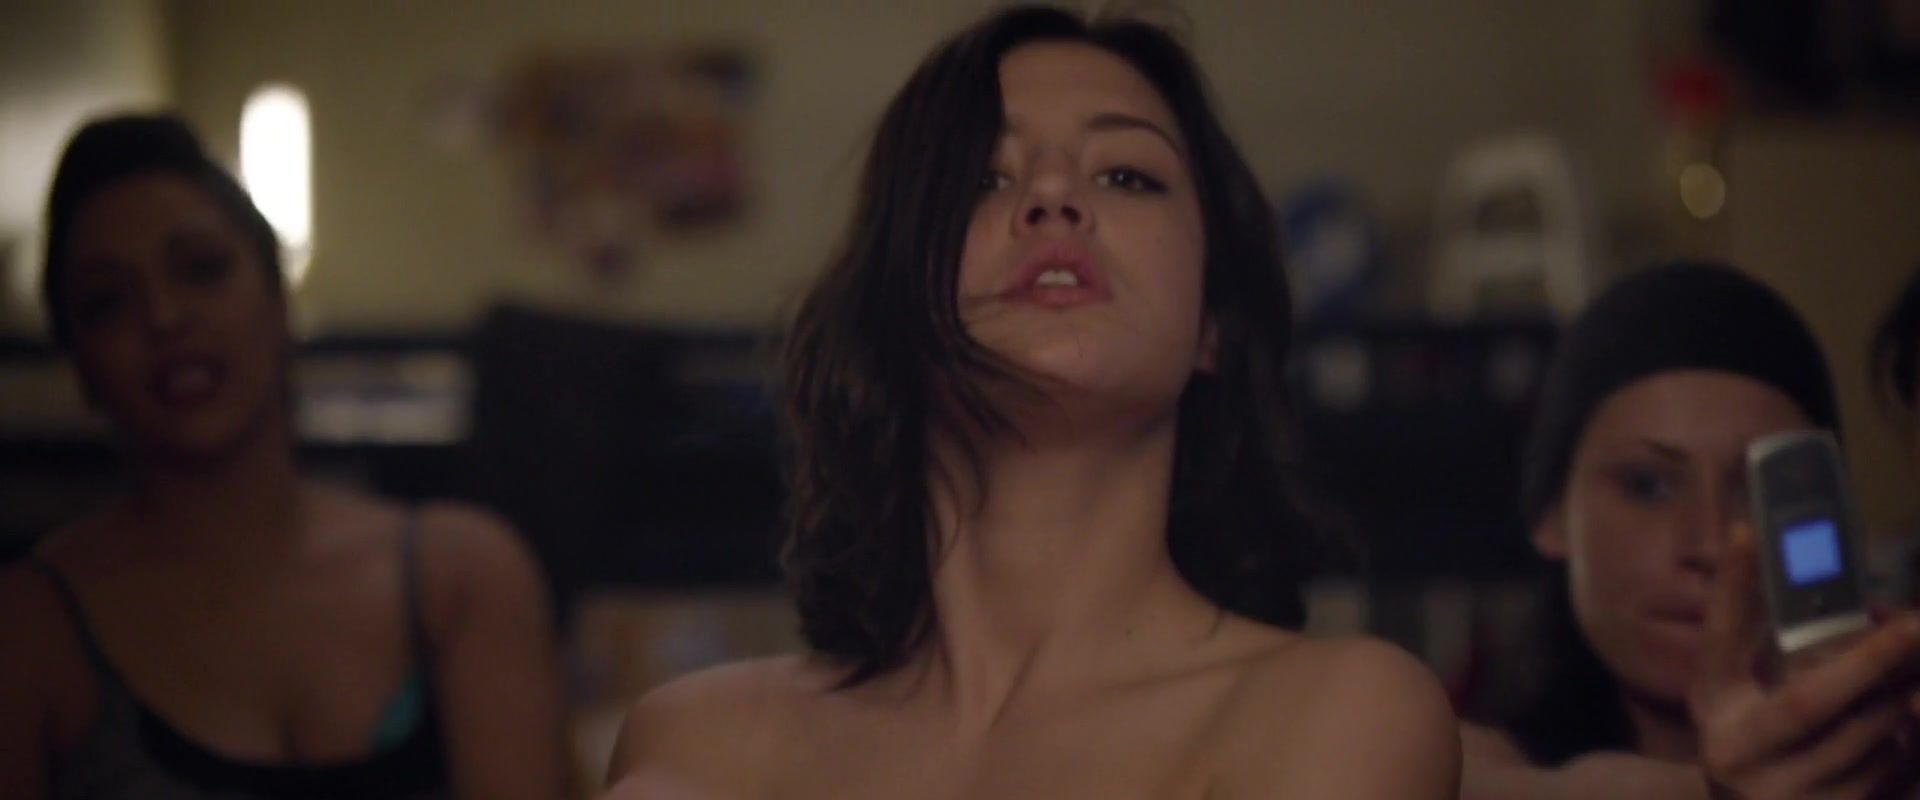 18Comix Adele Exarchopoulos Nude - Eperdument (2016) Cam Sex - 1